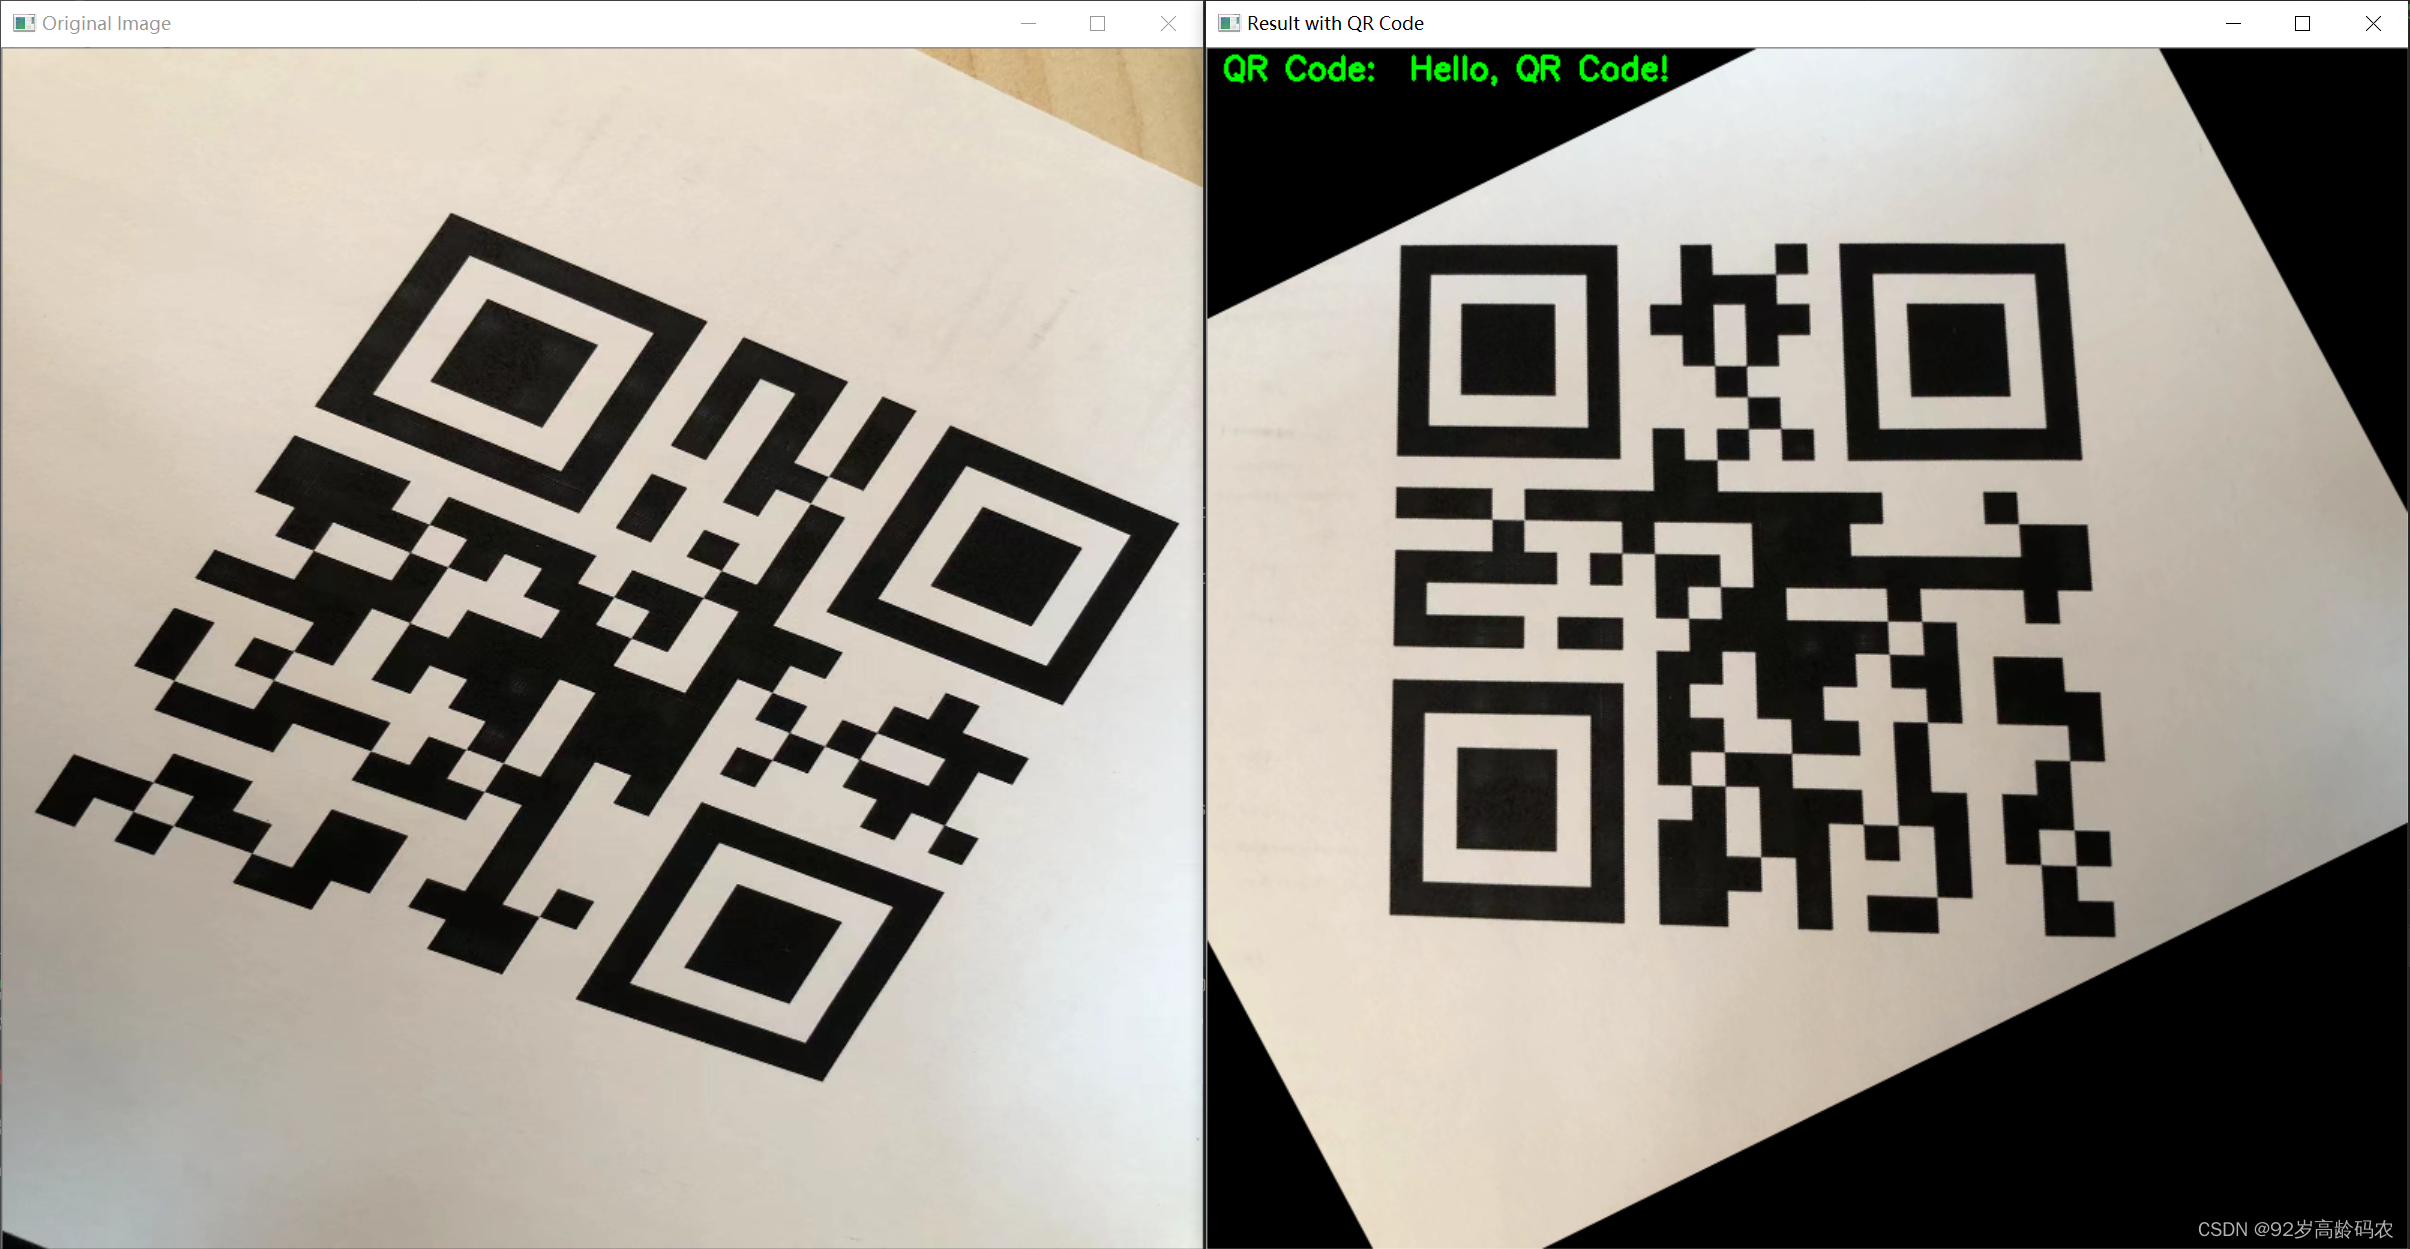 Result with QR Code